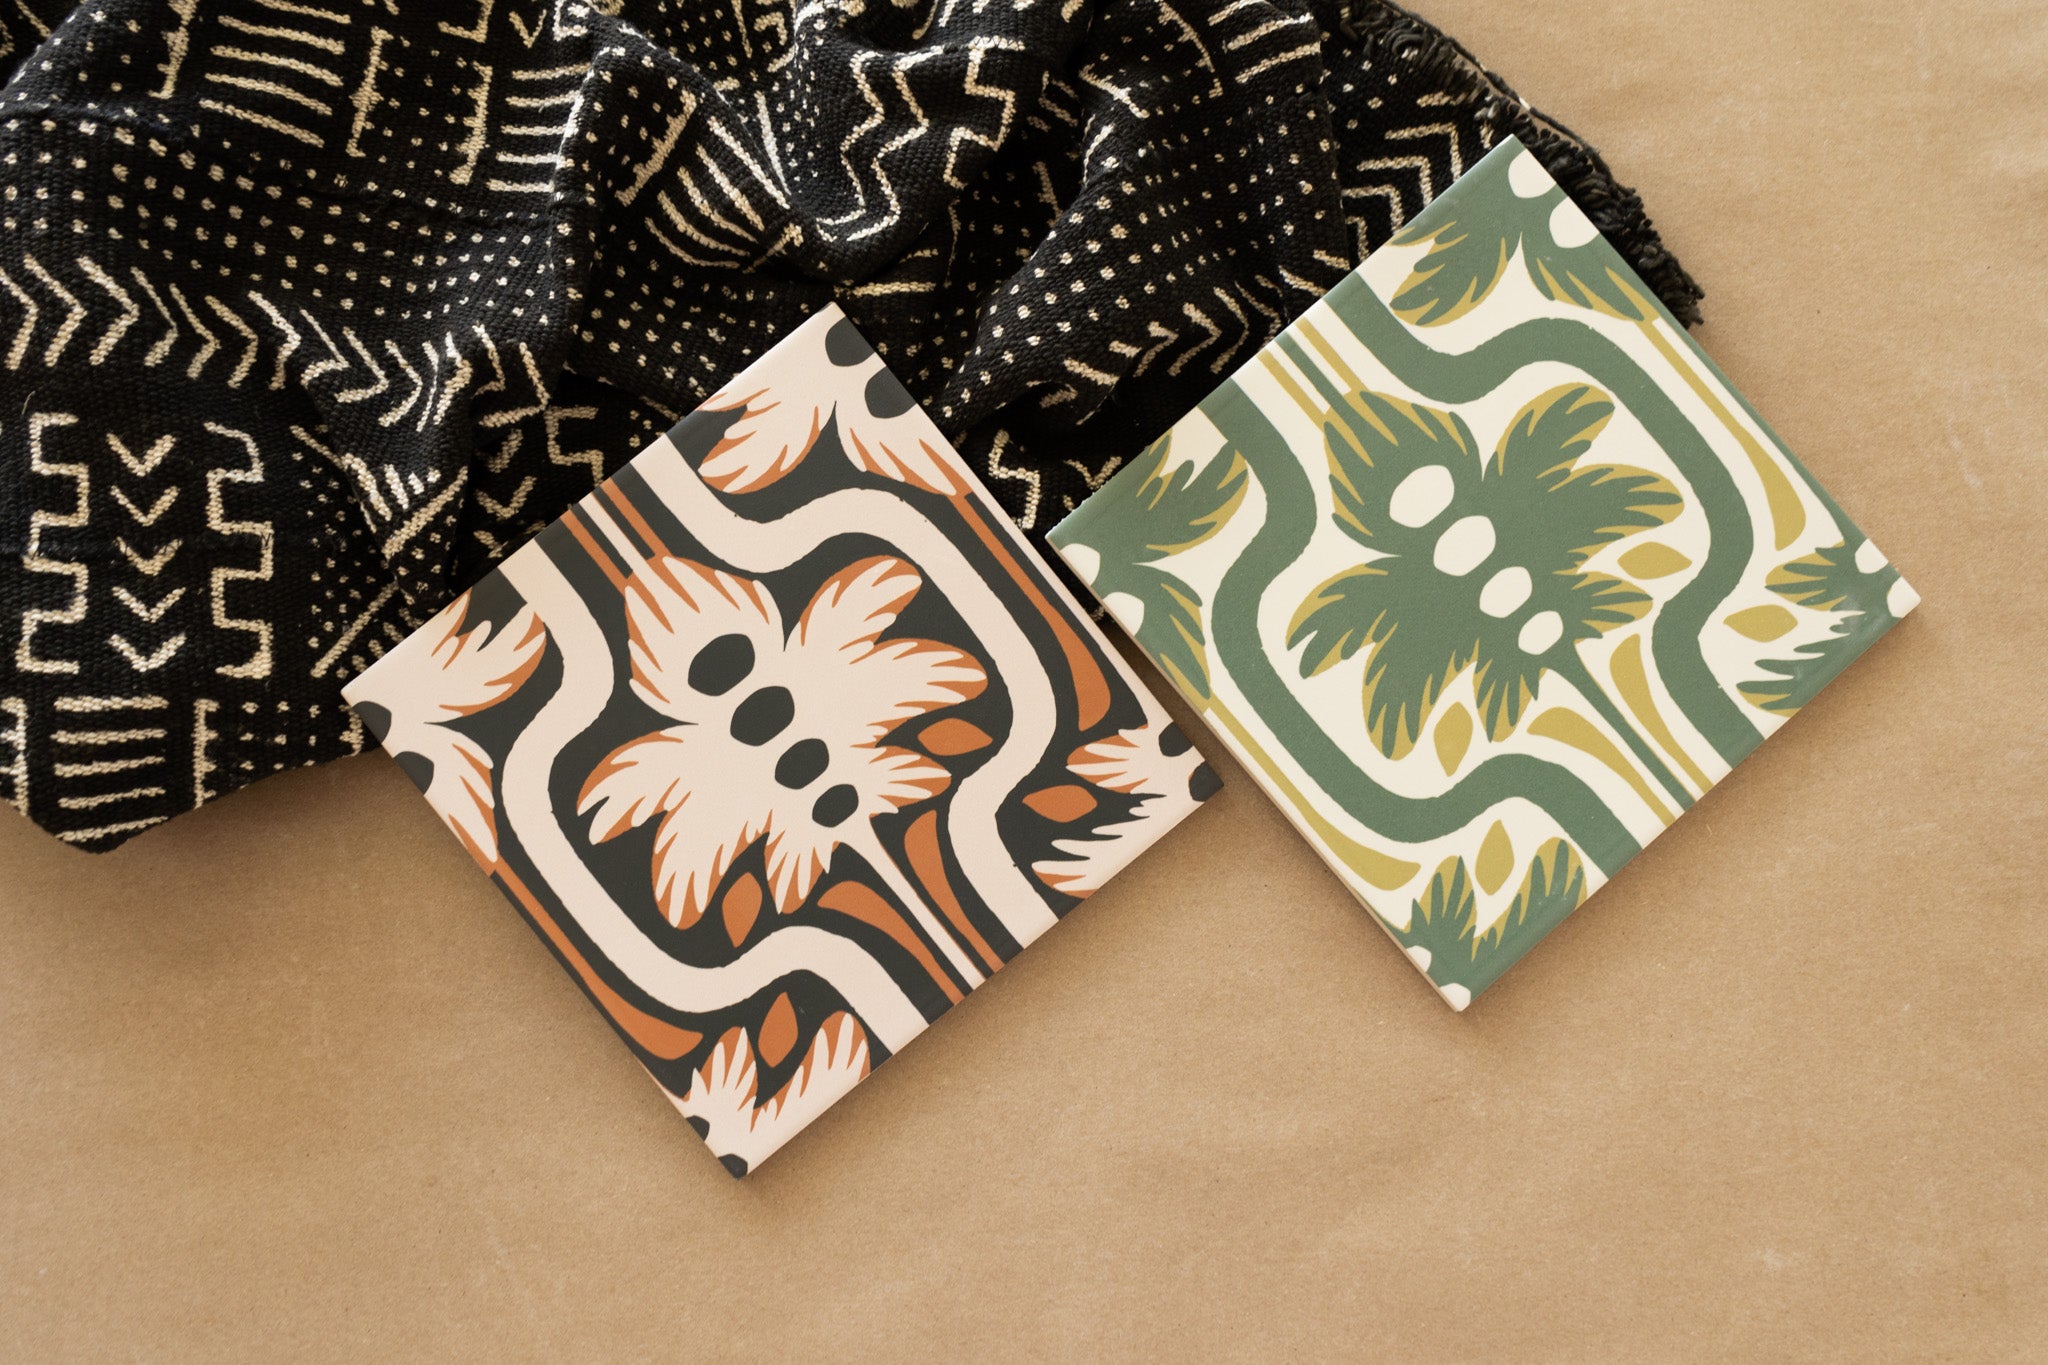 Green and black floral patterned tiles